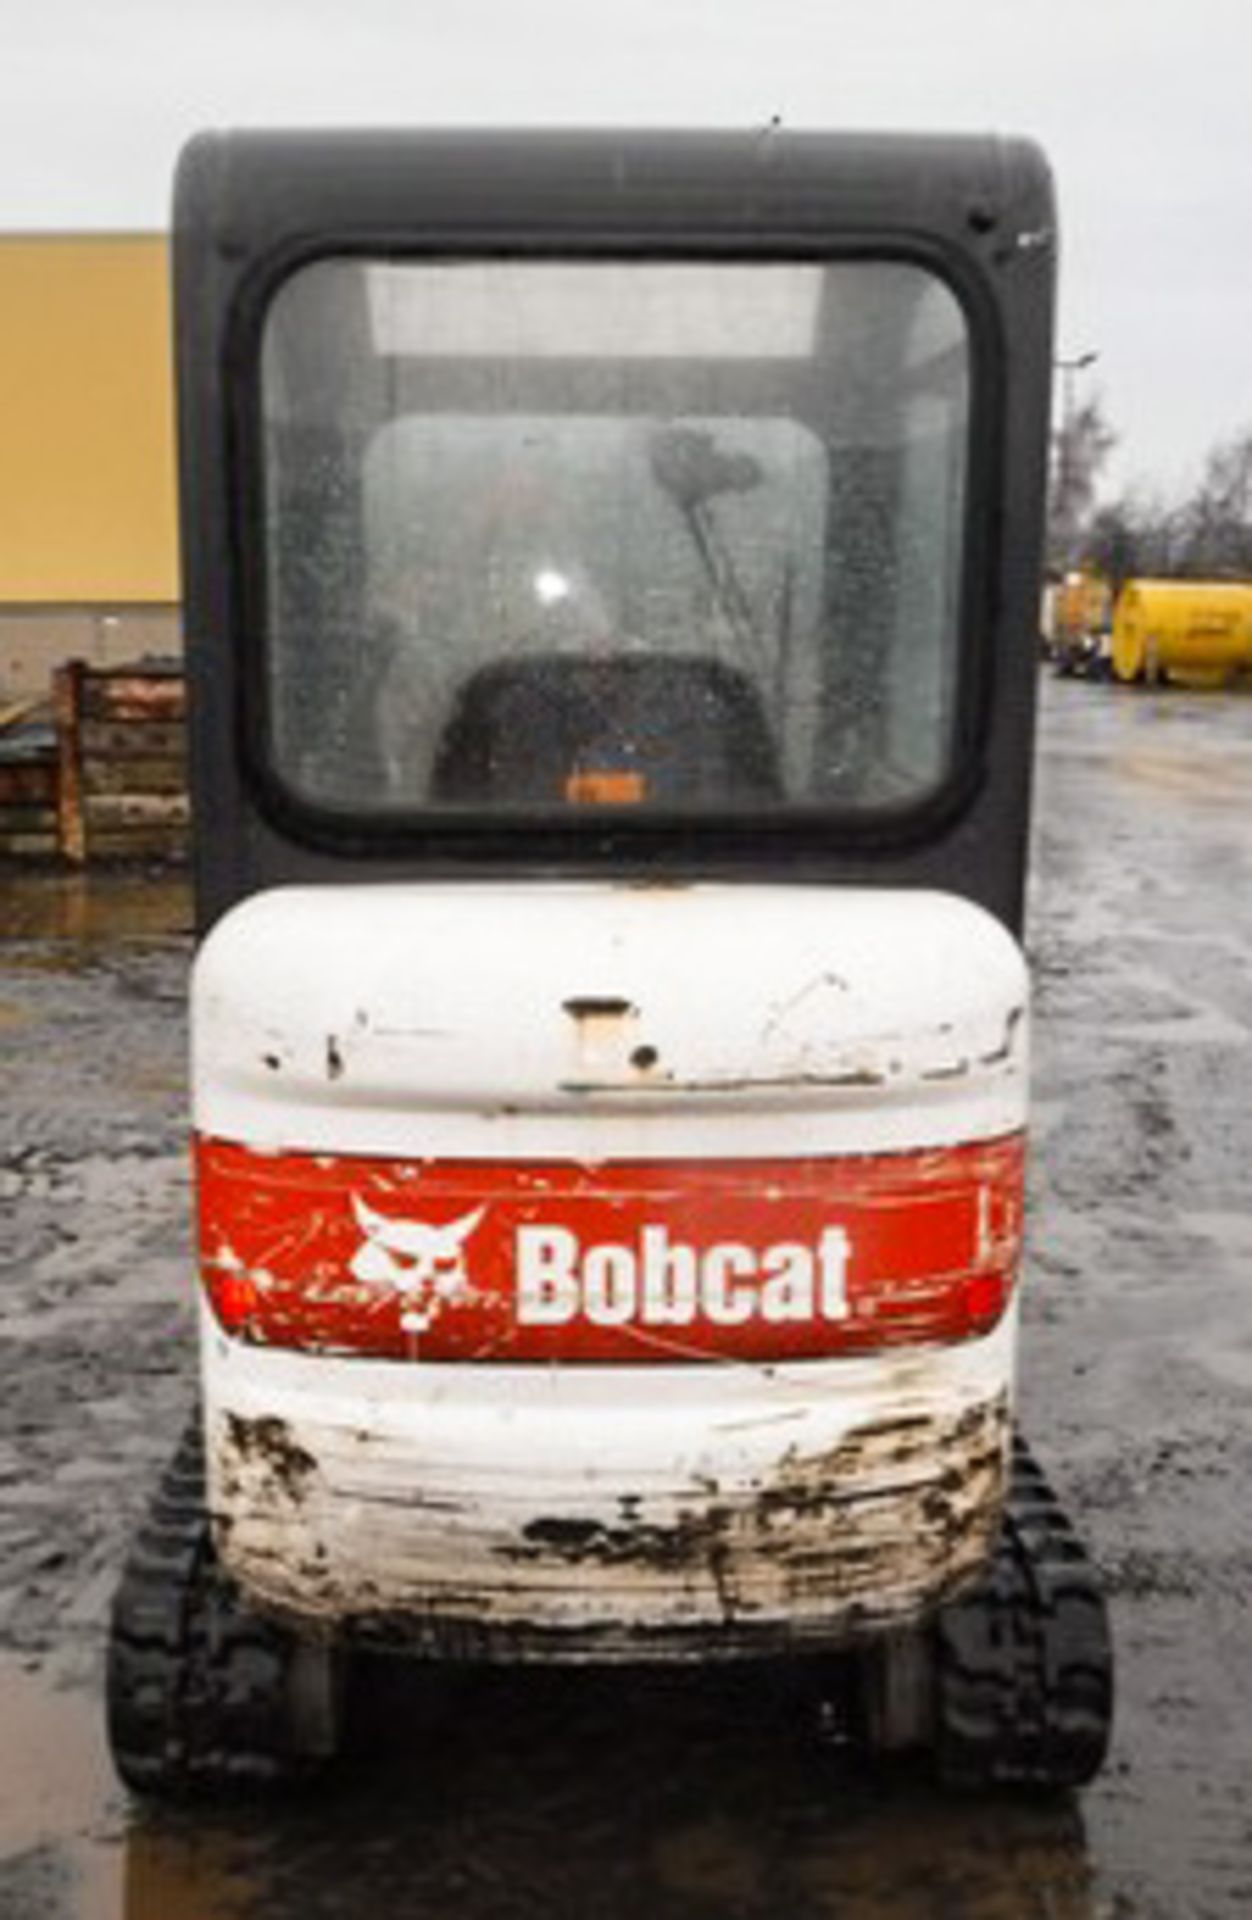 2011 BOBCAT E16, S/N AHLL11016, 2101HRS (NOT VERIFIED), 3 BUCKETS, OPERATING WEIGHT 1.6T - Image 12 of 15